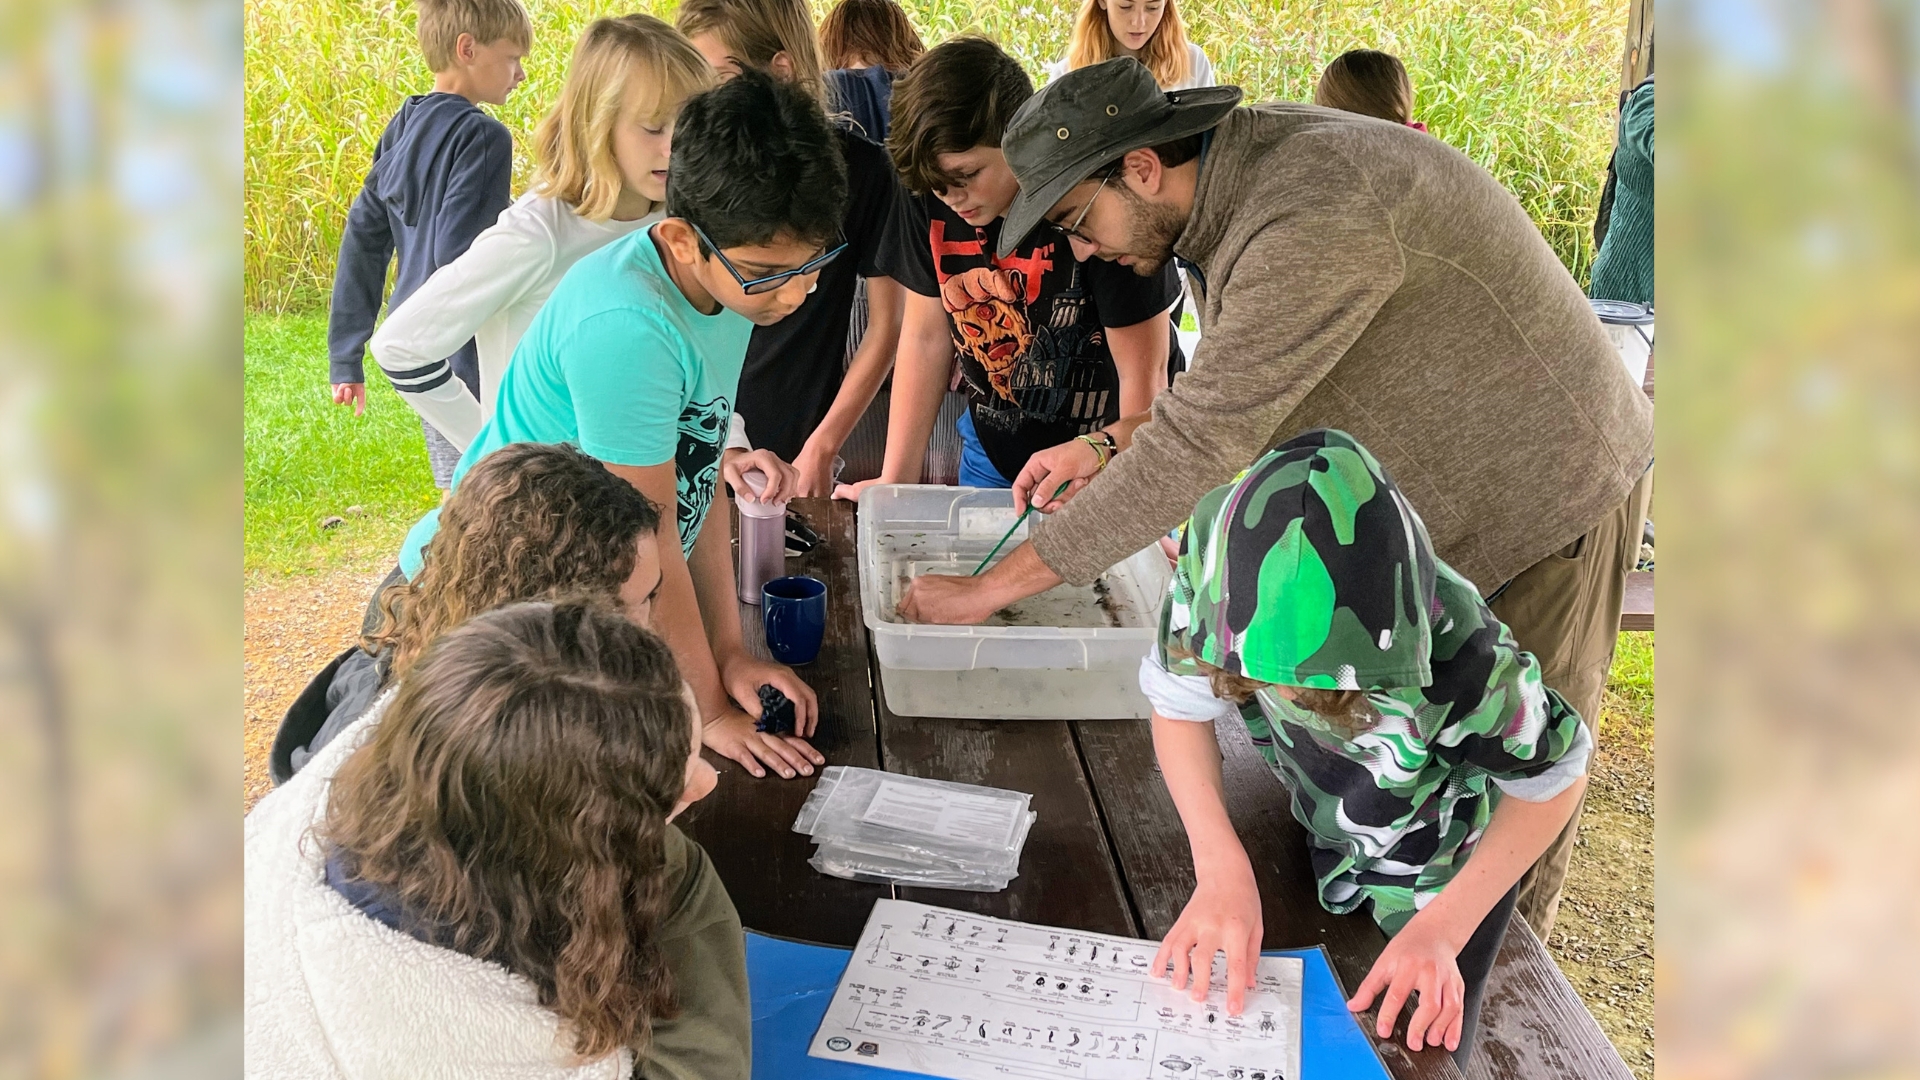 Leader Jake and students from the Delta Program examine macroinvertebrate specimens during a group program